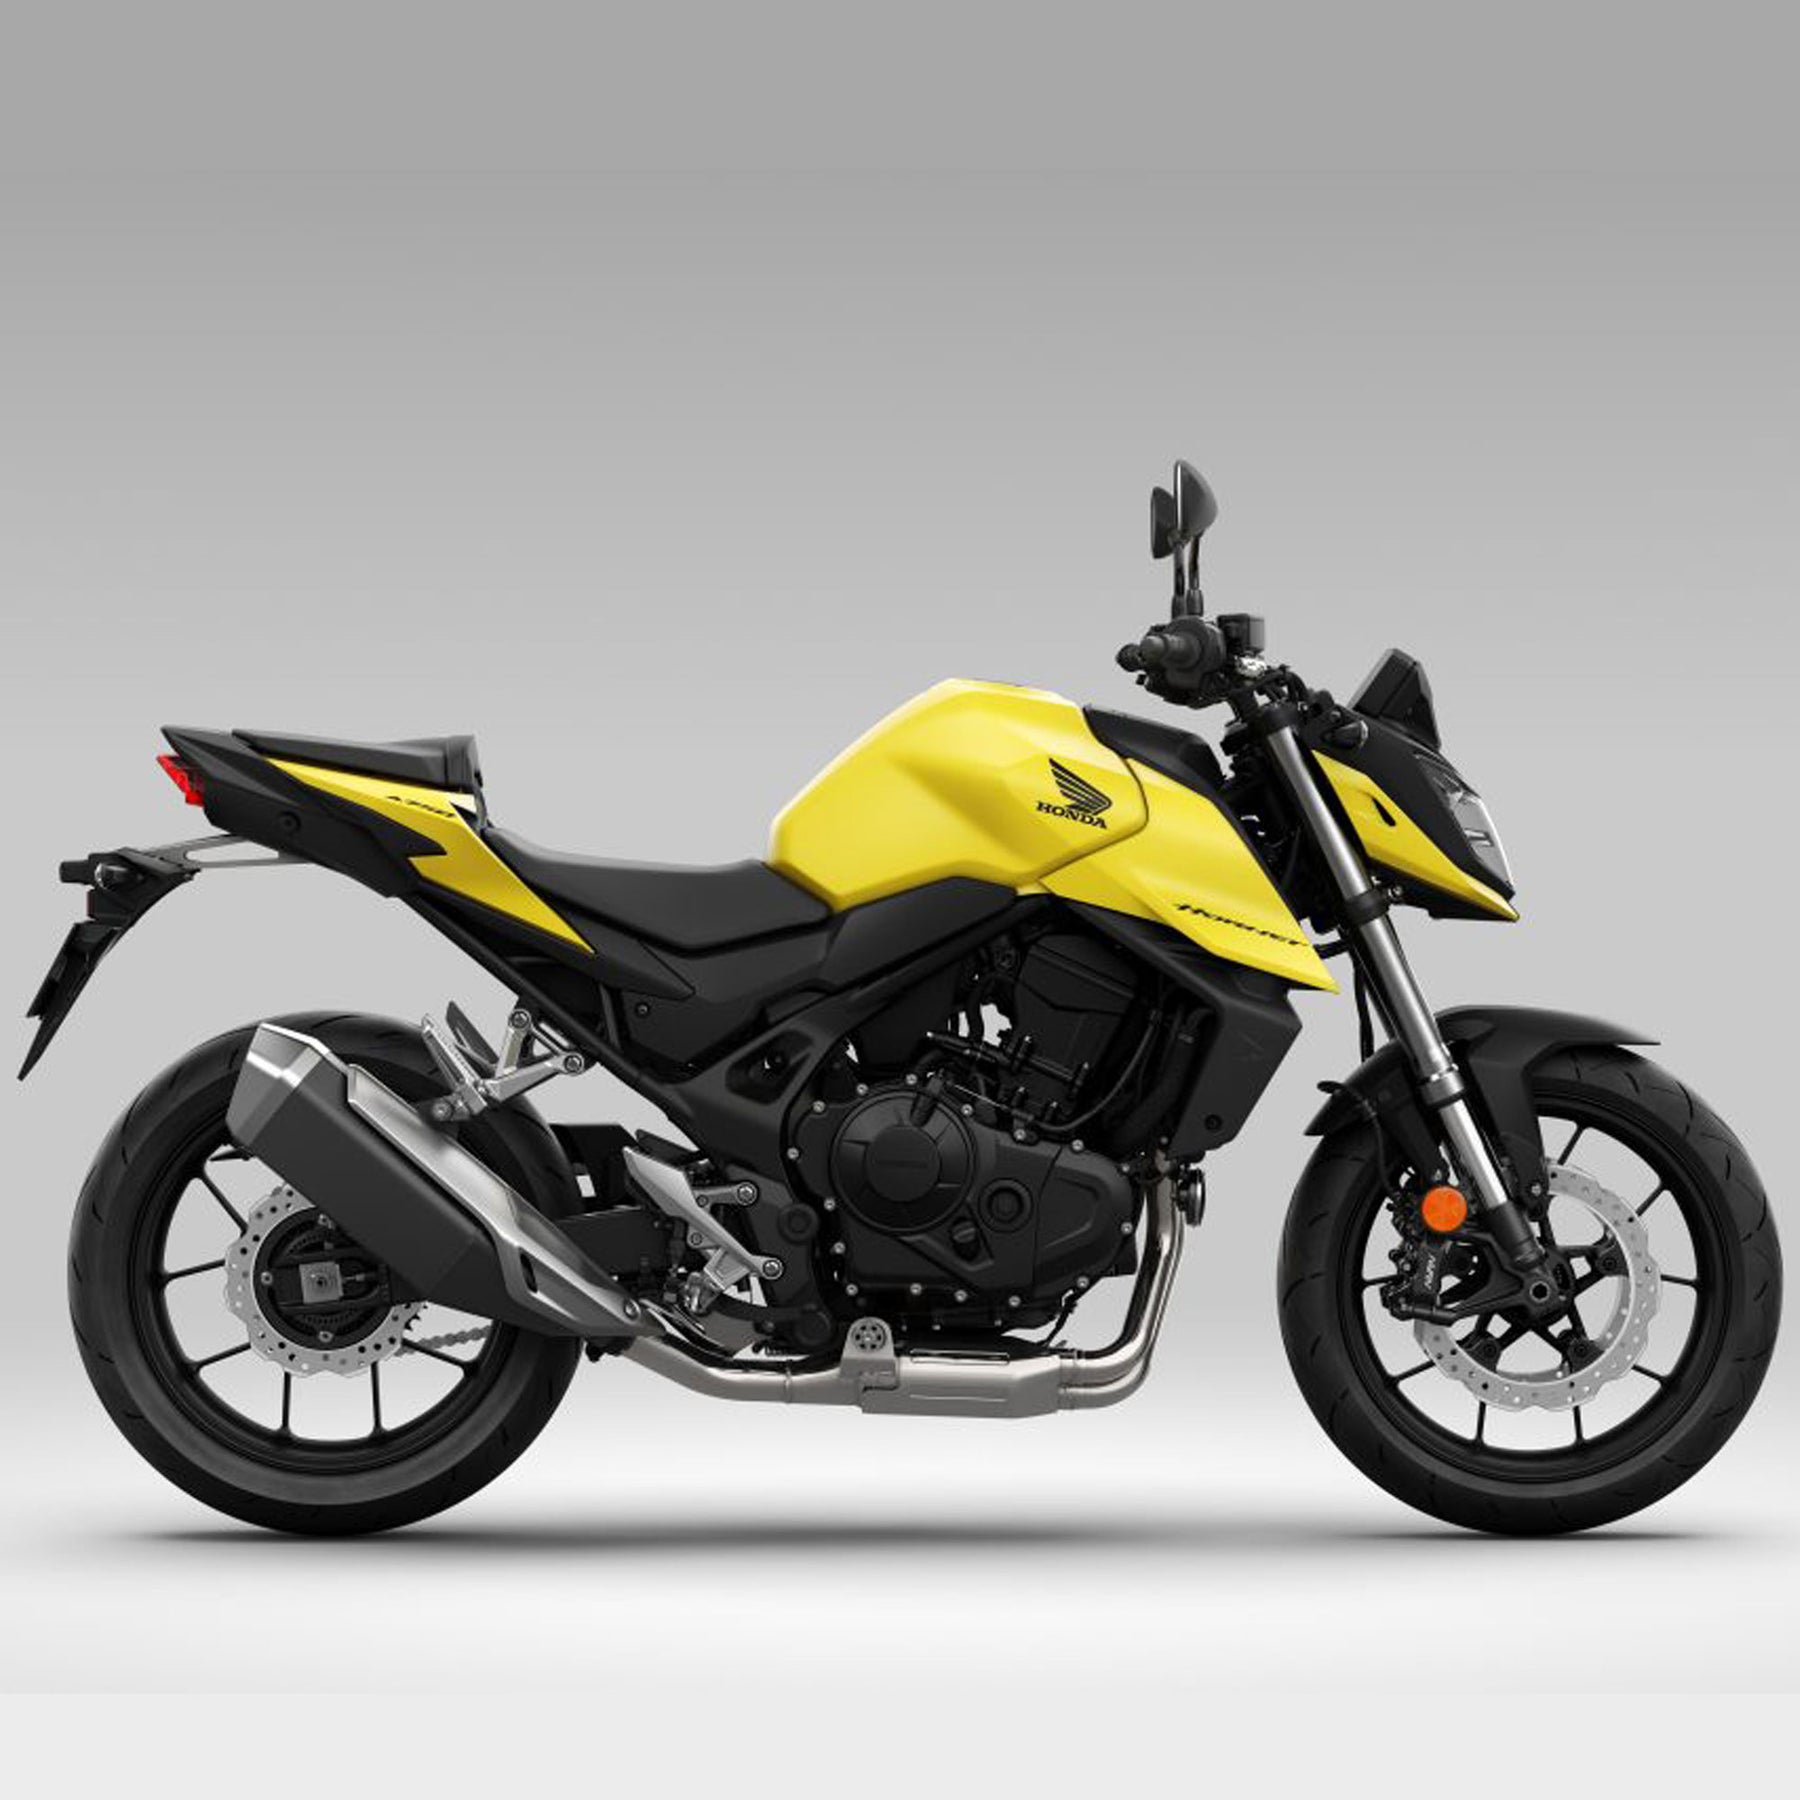 Experience a cafe race like no other with The New Honda CB650R